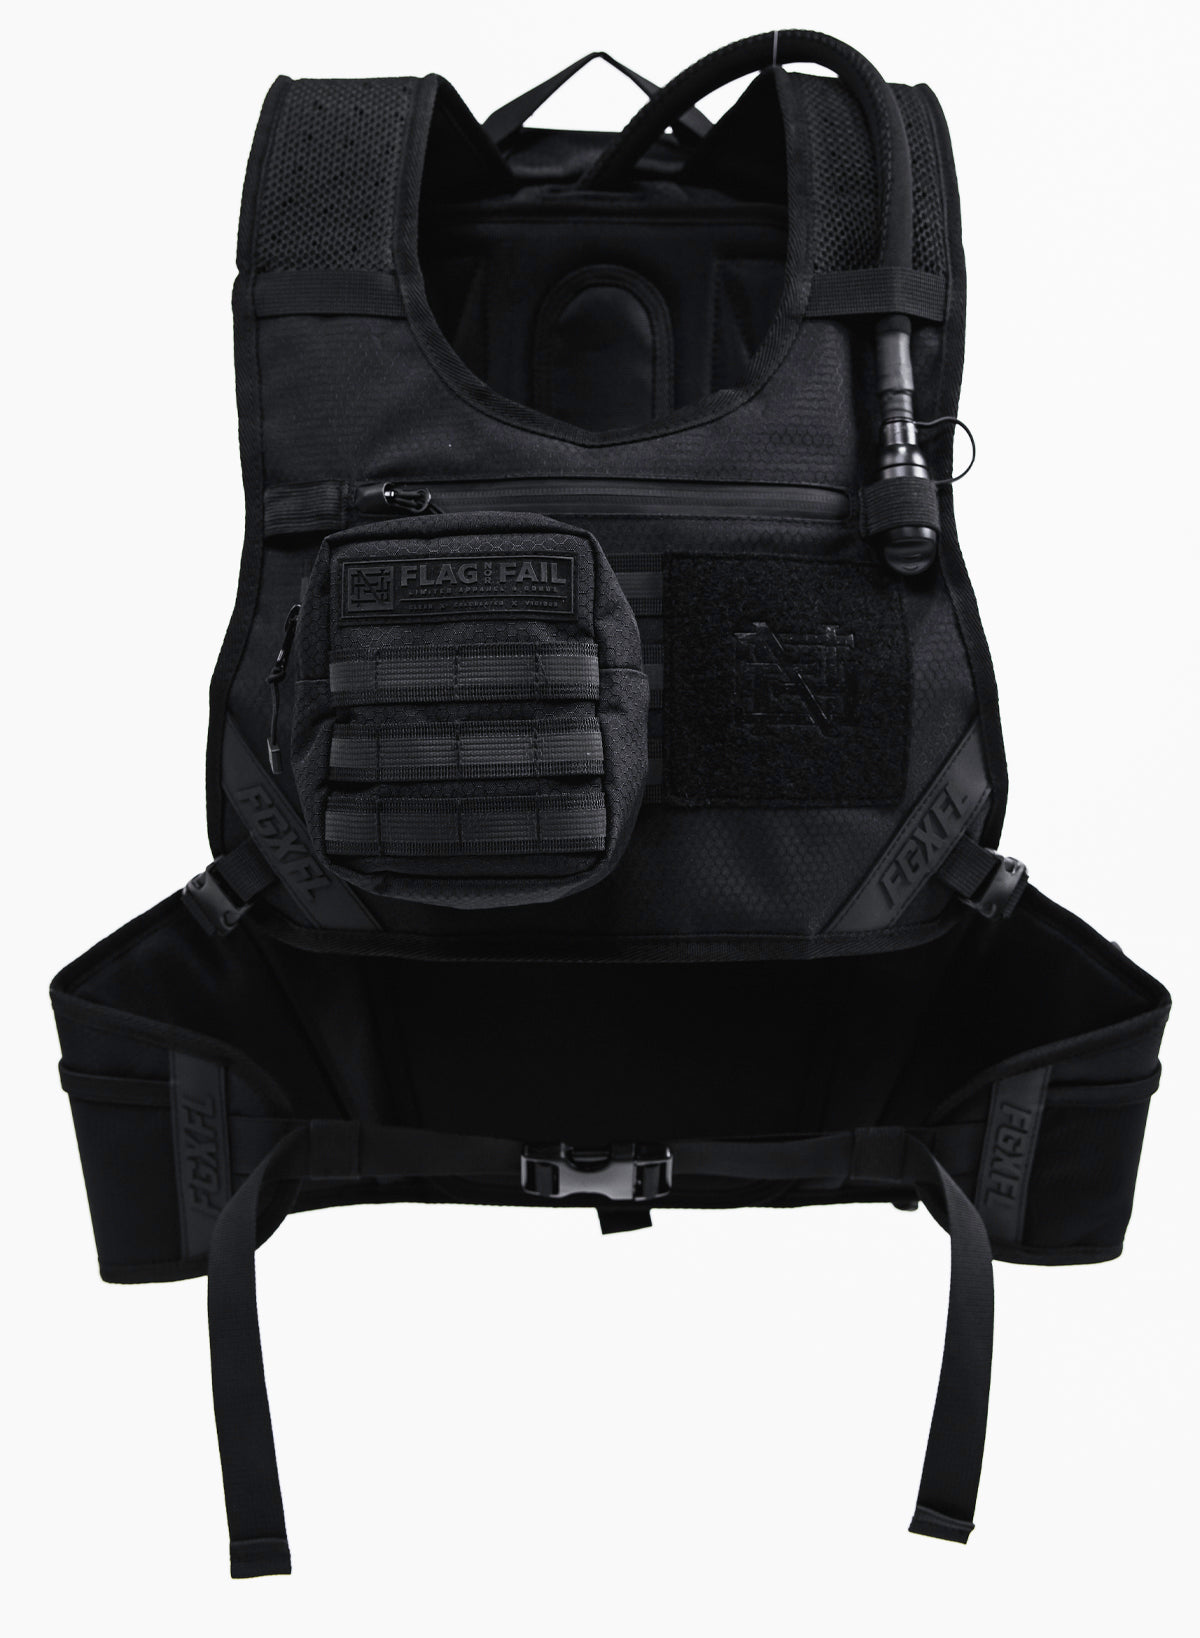 Photo showing the Utility pouch attached to the Apex vest as an accessory.